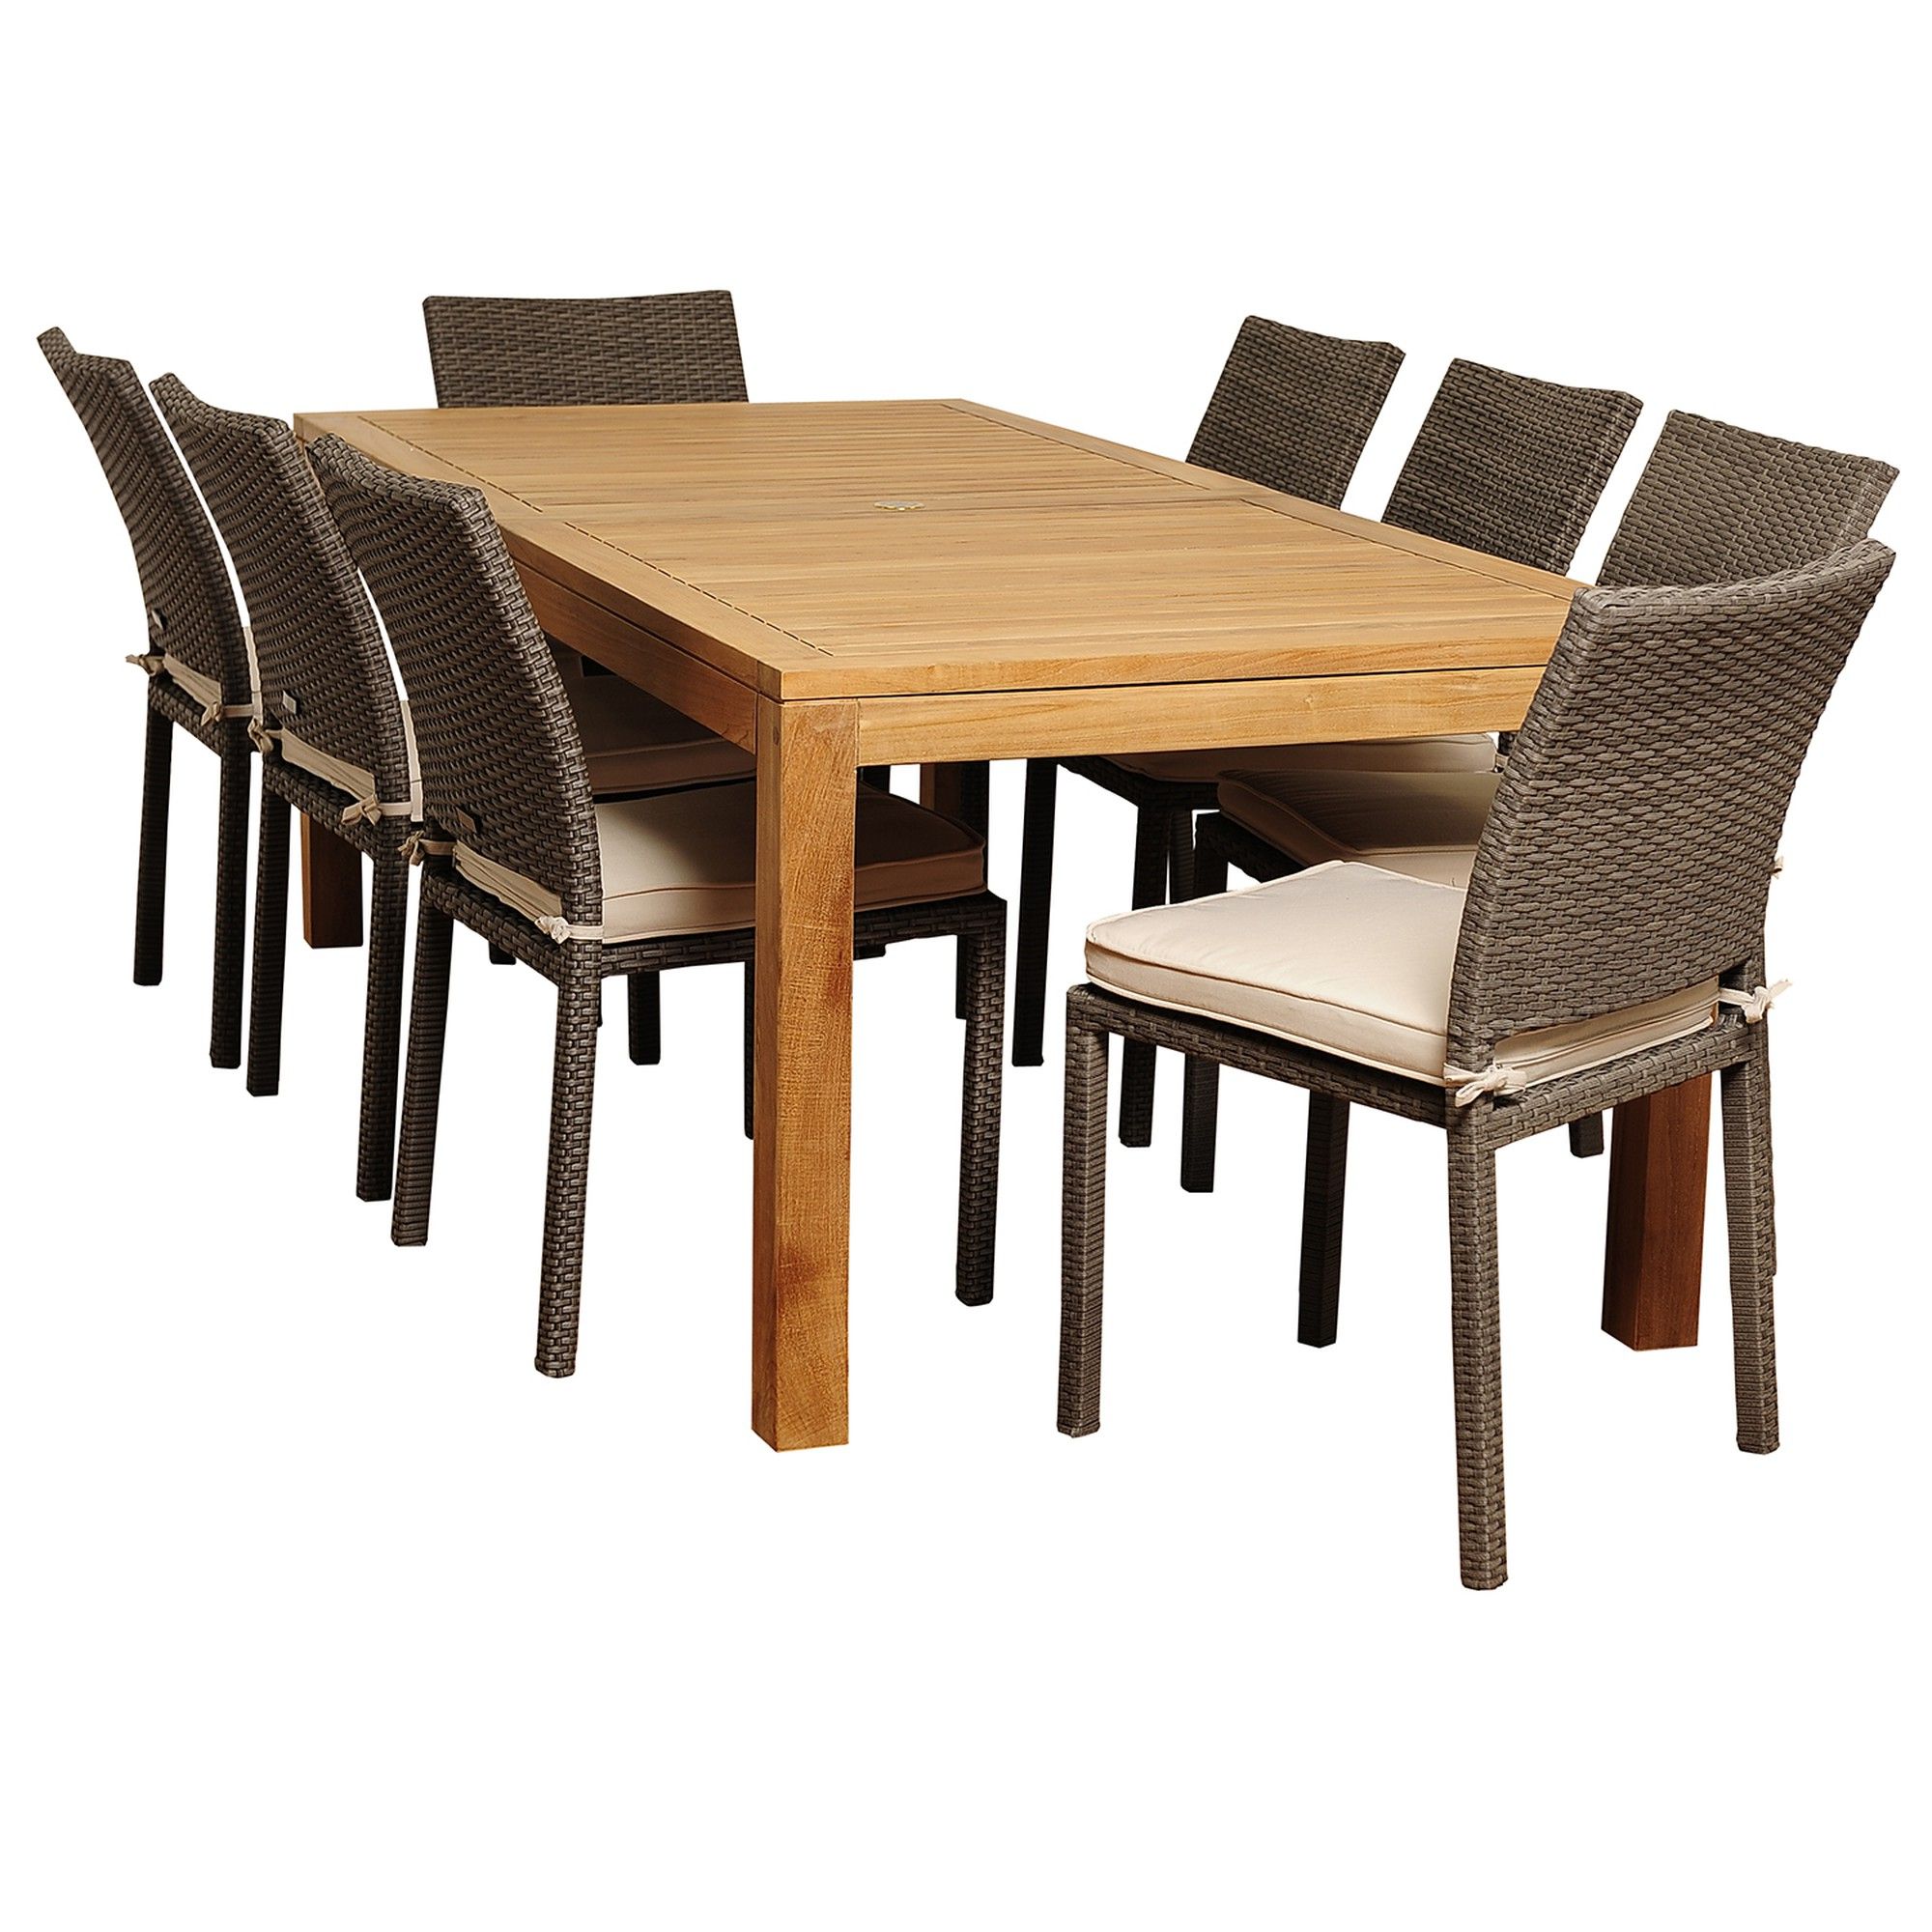 9 Piece Brown Damian Teak Rectangular Outdoor Patio Furniture Dining For Most Recent Brown 9 Piece Outdoor Dining Sets (View 13 of 15)